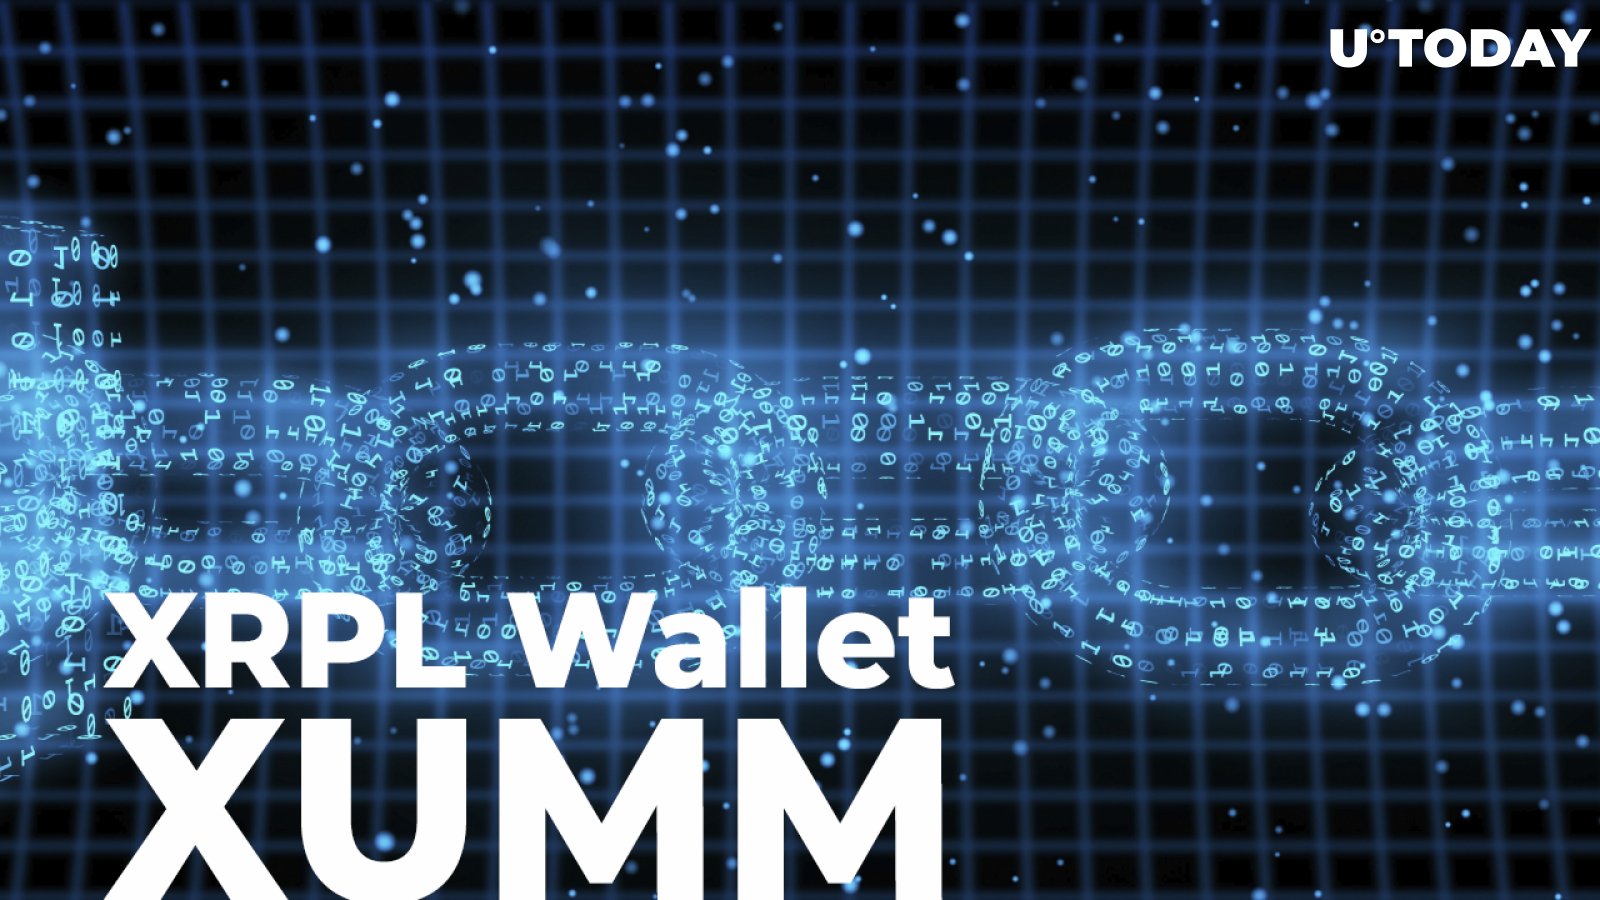 XRPL Wallet XUMM to Have Native Fiat Paygate, Here's How